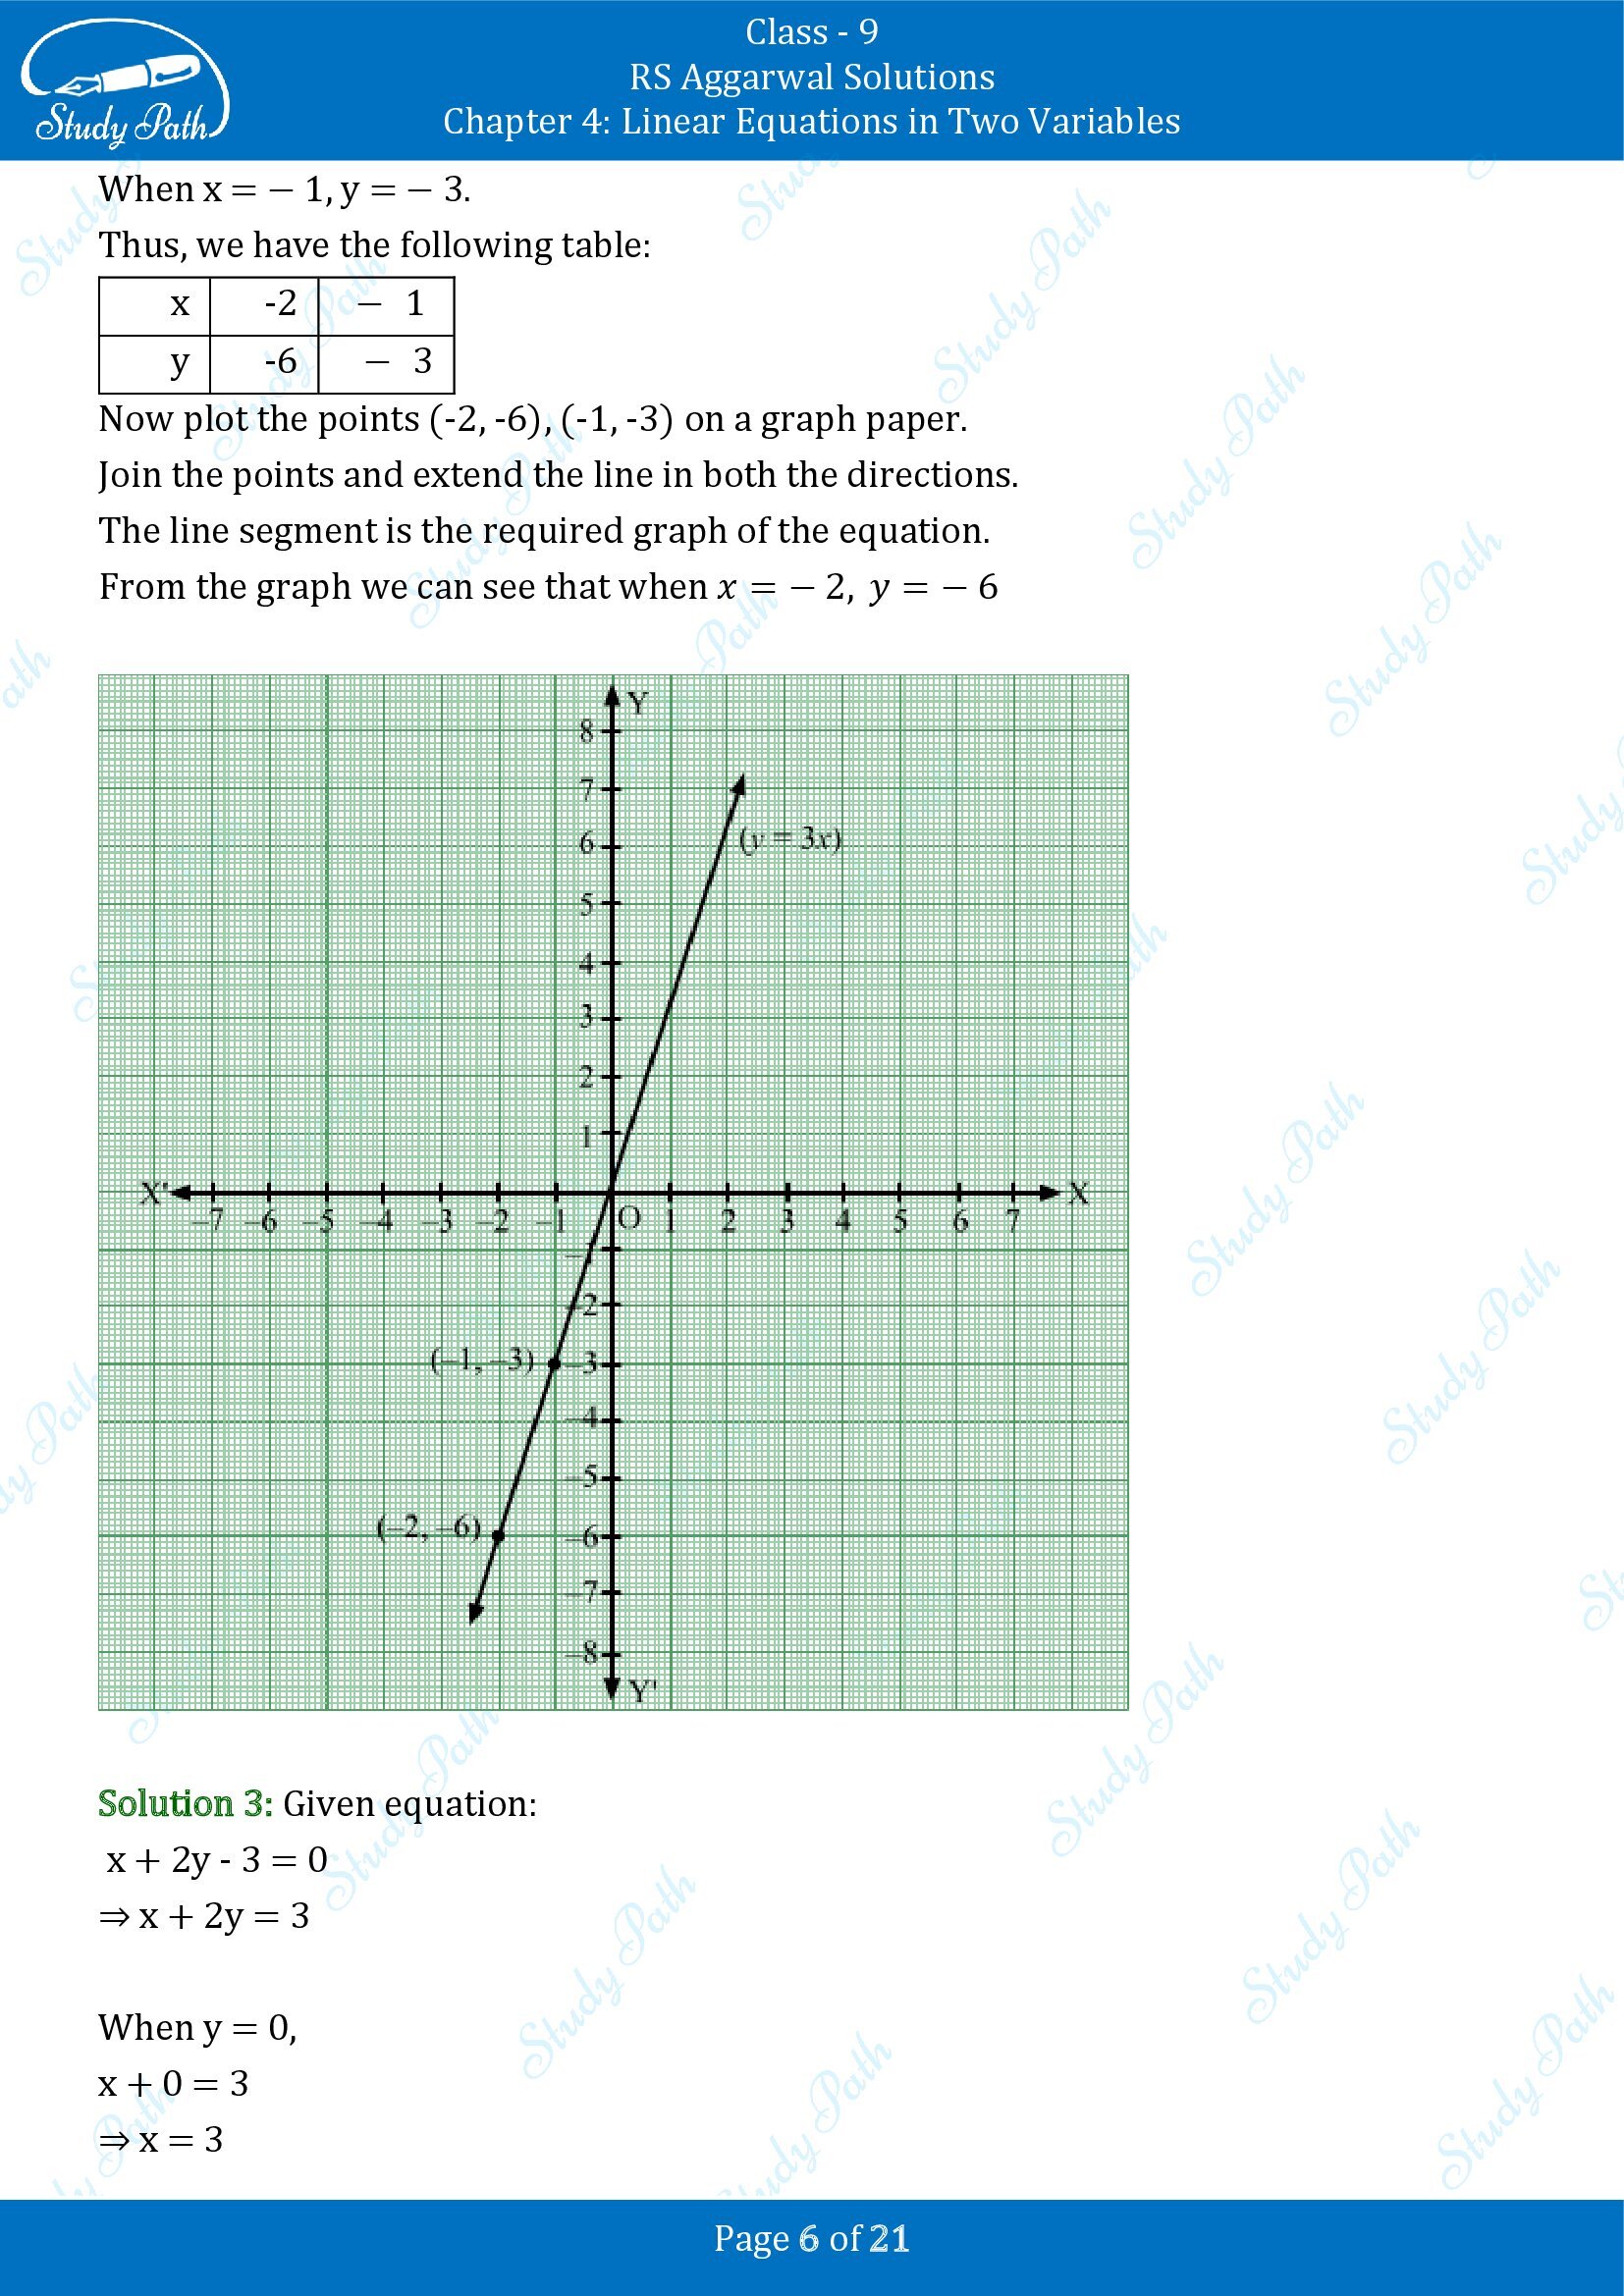 RS Aggarwal Solutions Class 9 Chapter 4 Linear Equations in Two Variables Exercise 4B 00006